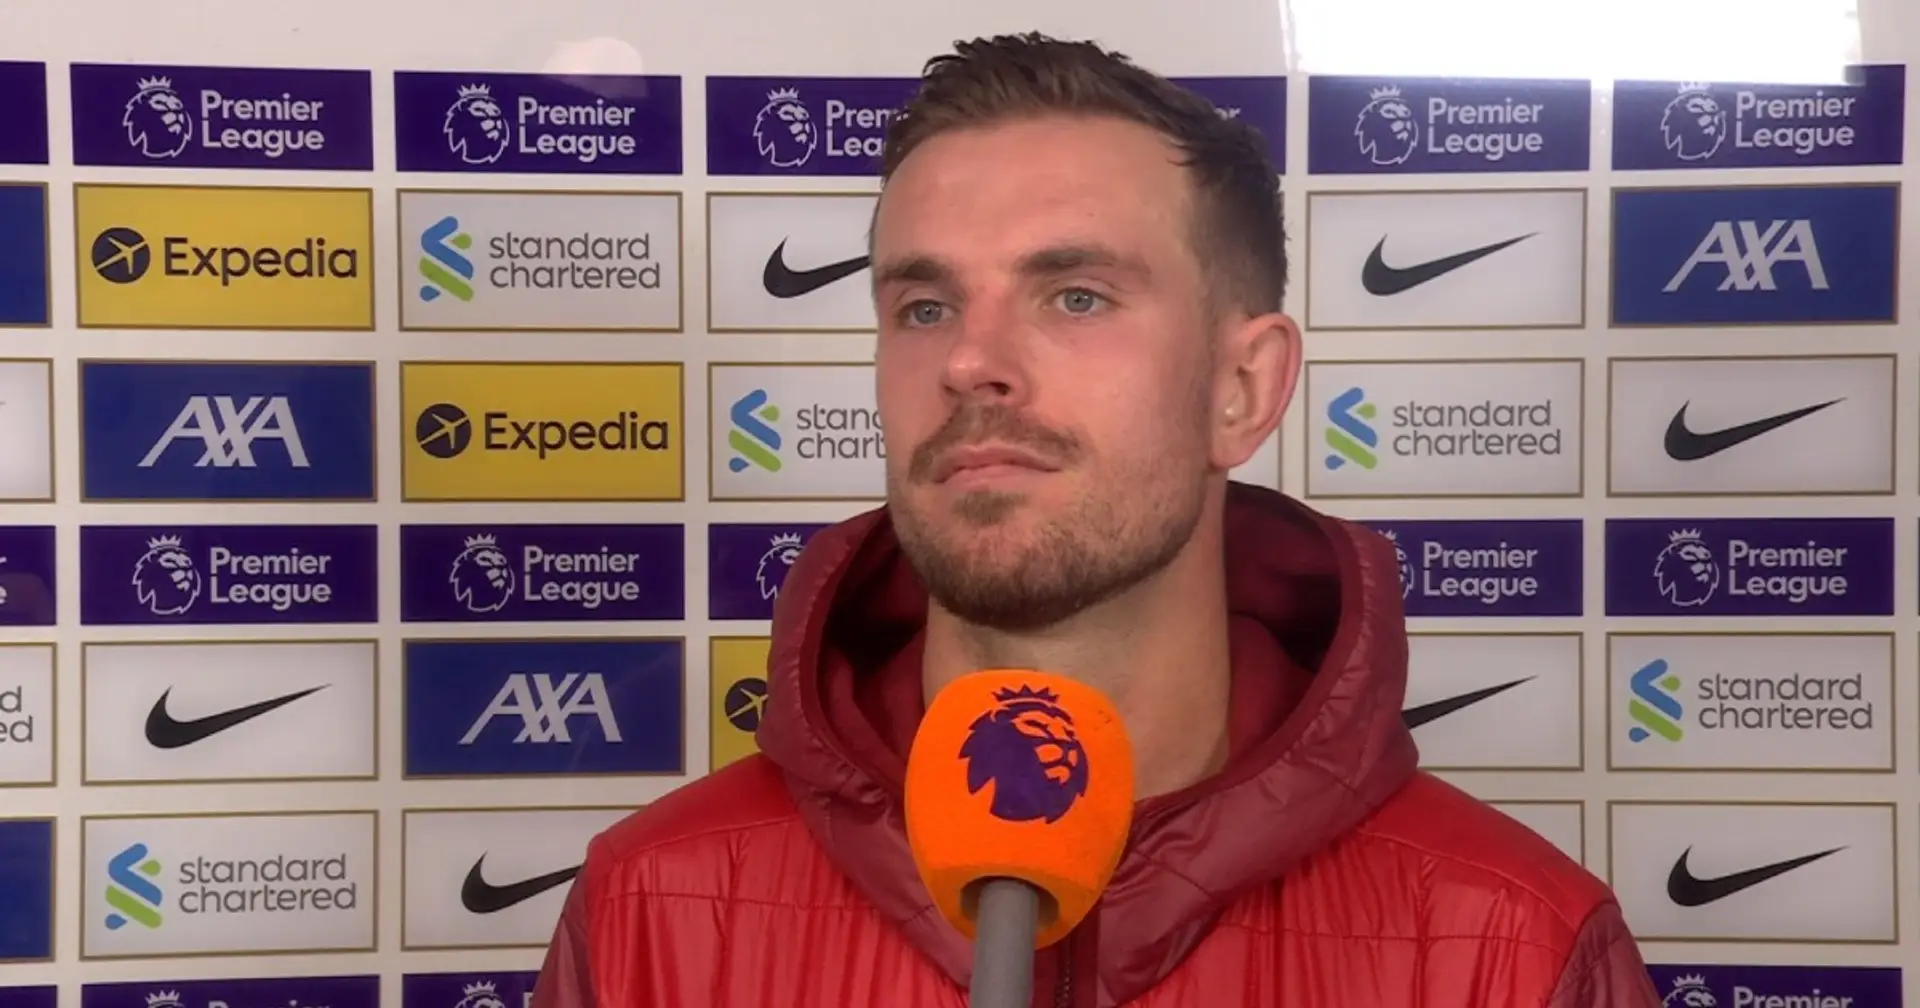 'The boys have made me proud': Henderson reacts to beating Wolves but losing out on league title